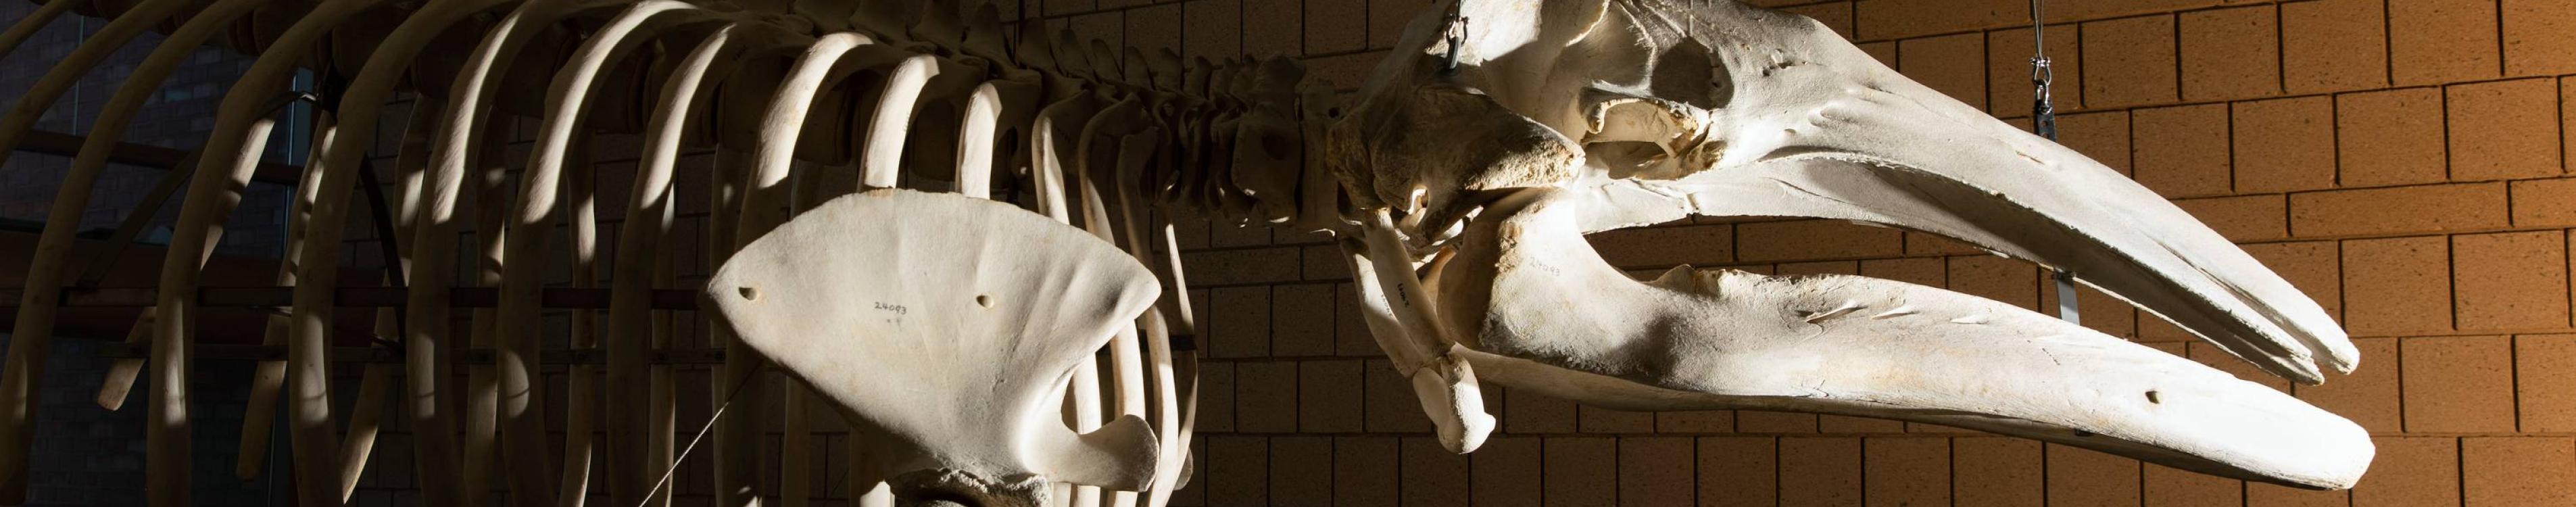 Gray whale skeleton in the Harned Hall atrium